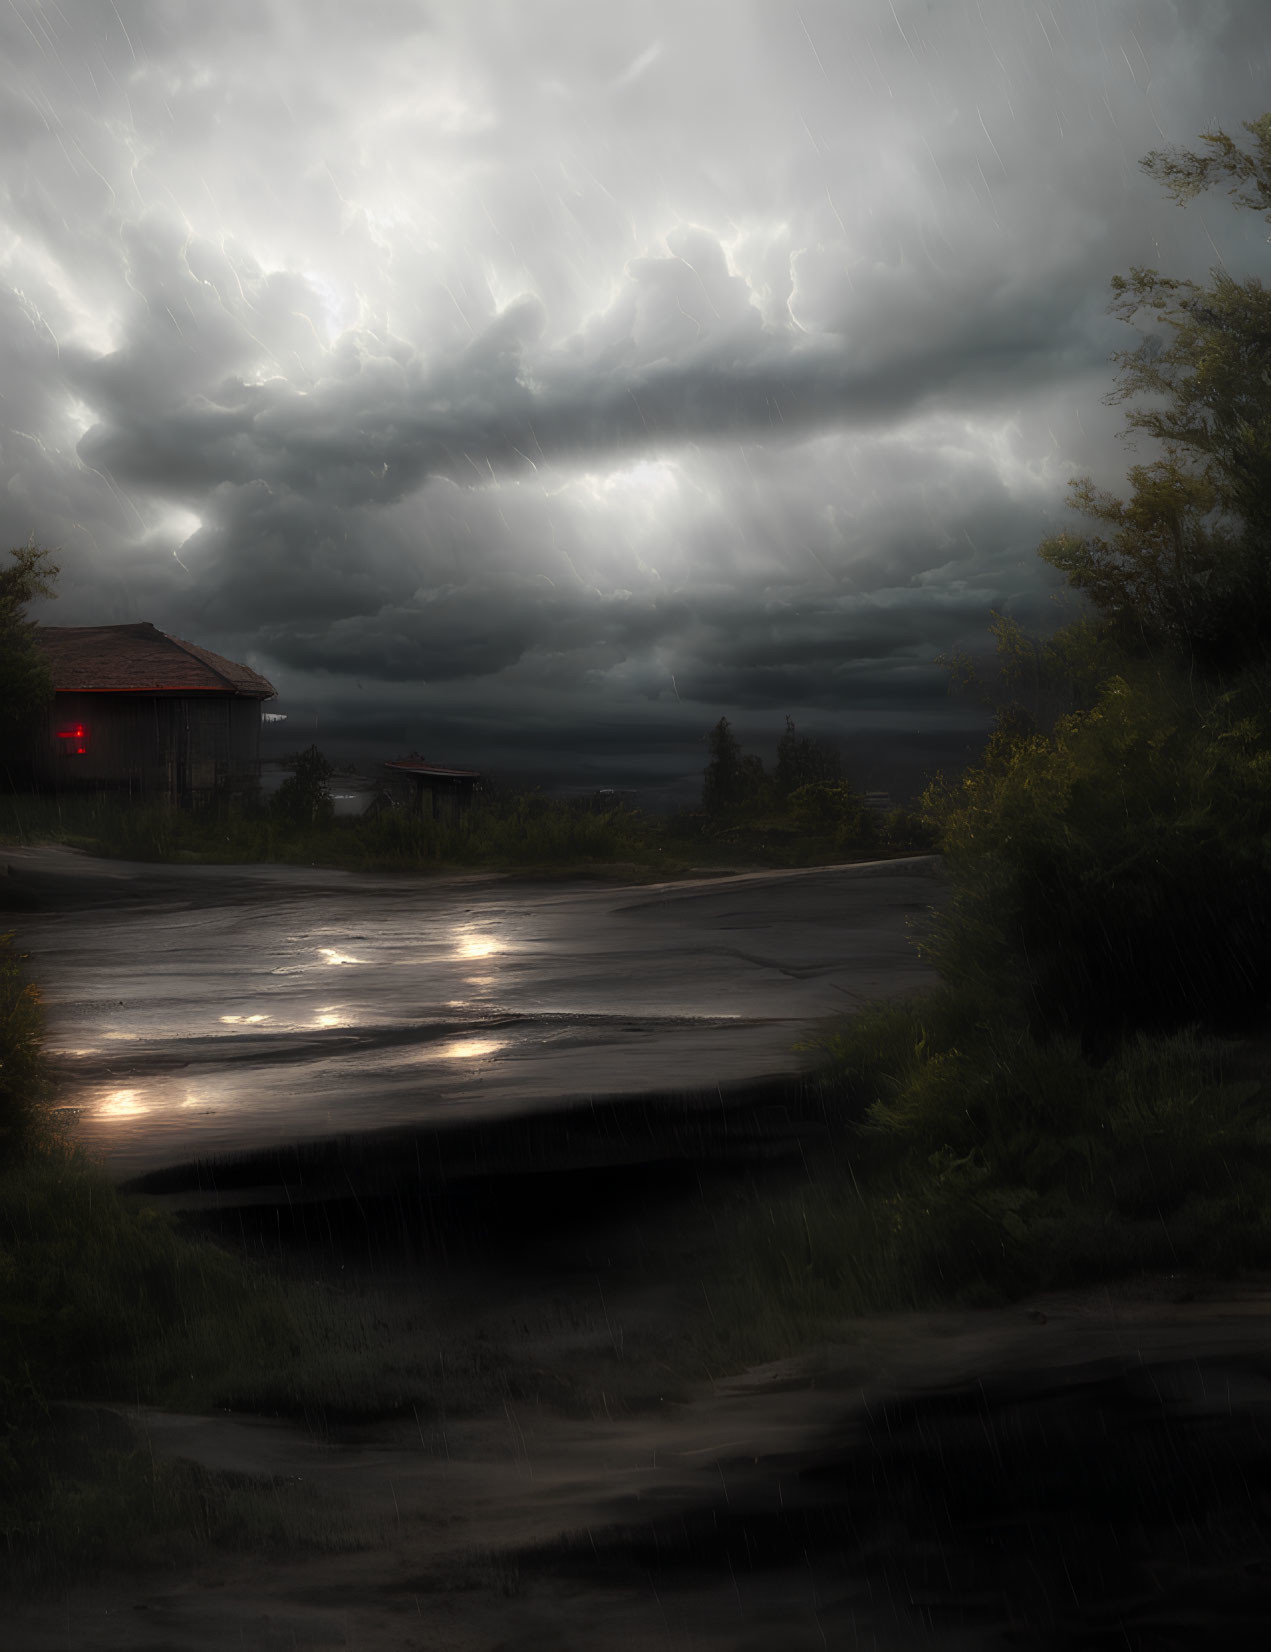 Stormy rural road with rain and lone building under heavy clouds